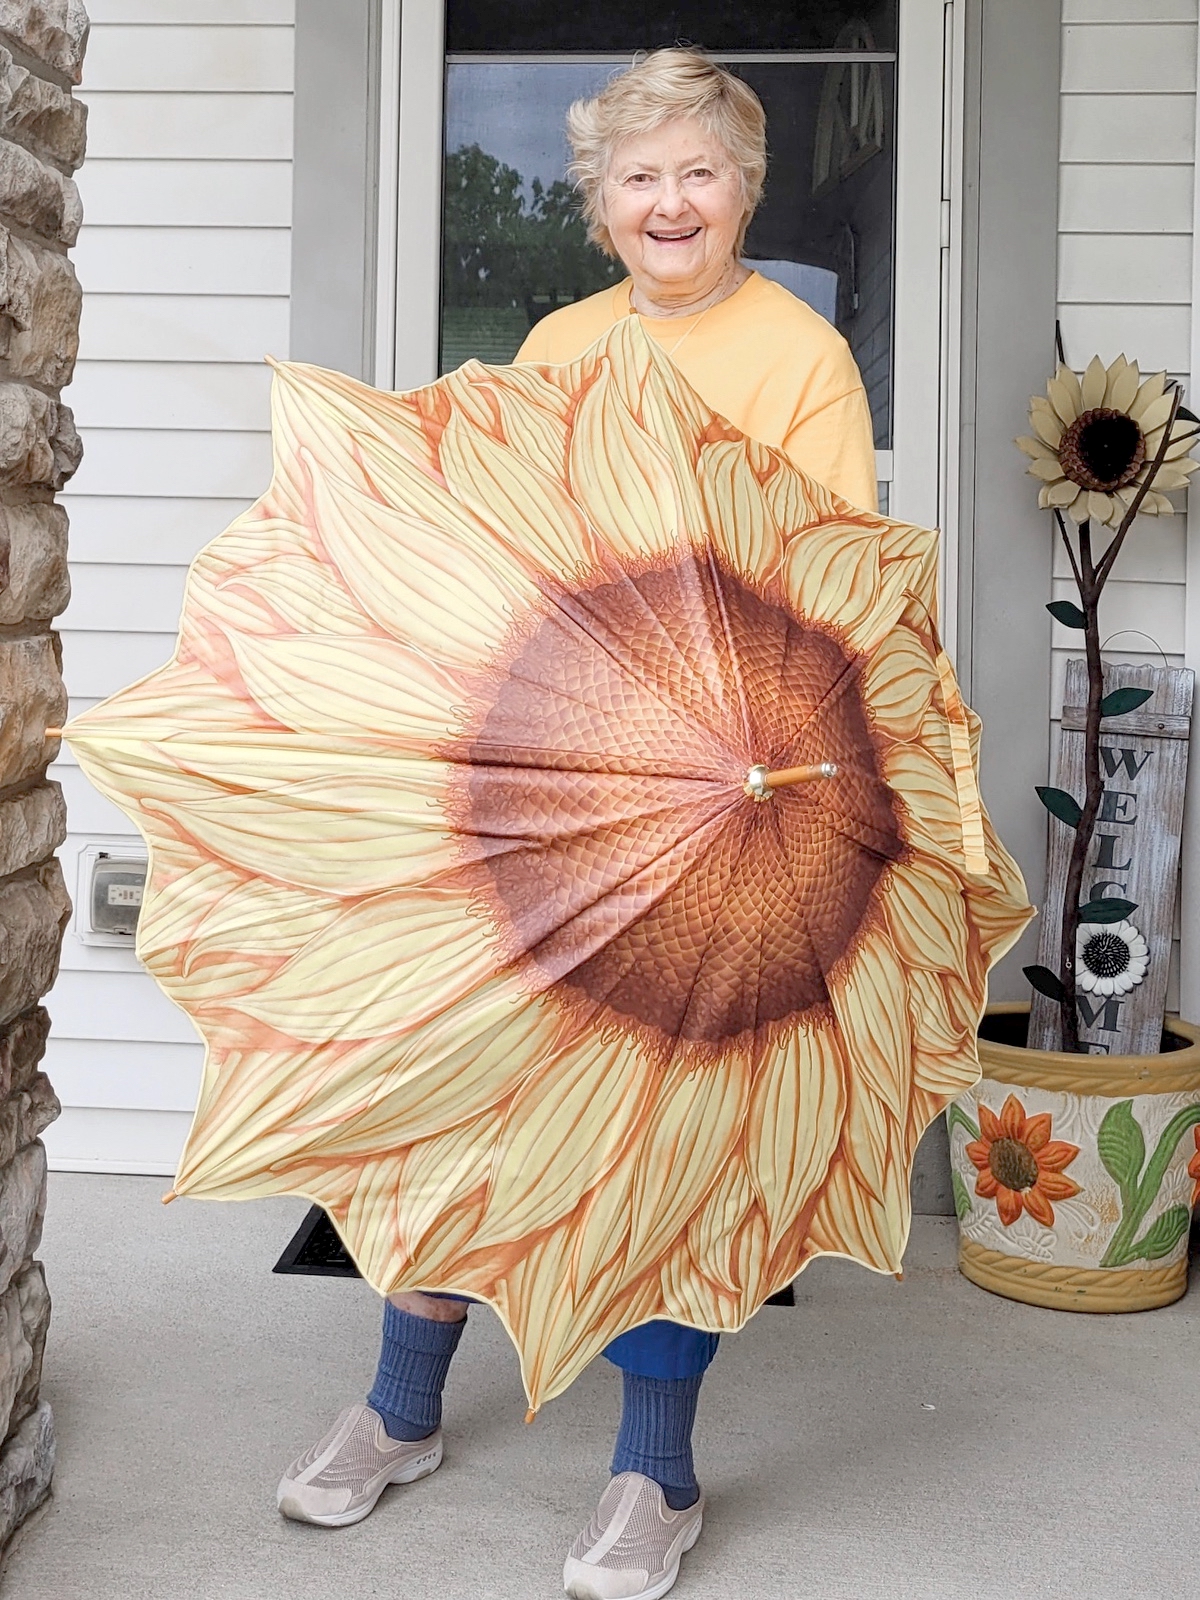 Judith Aronson (left) shows off a sunflower umbrella from her collection of sunflowers, which she’s famous for in Sun City. (Photos by Christine Such/My Sun Day News)